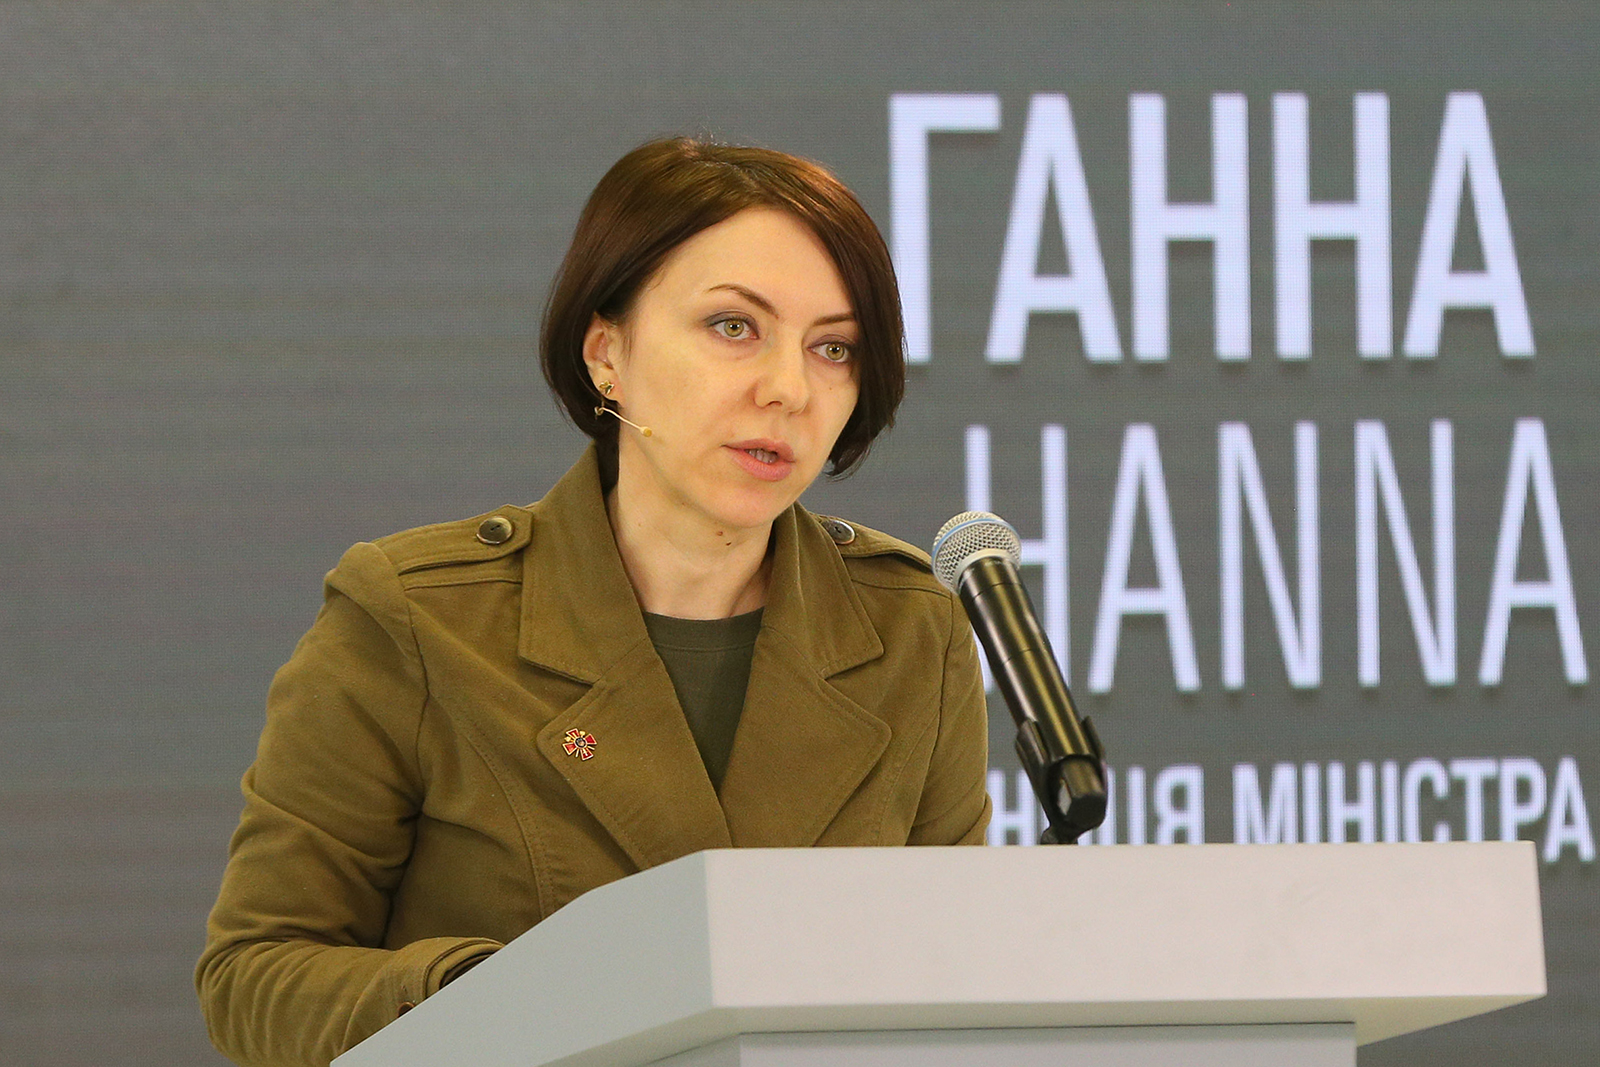 Hanna Maliar speaks during a press conference in Kyiv, Ukraine, on April 13.